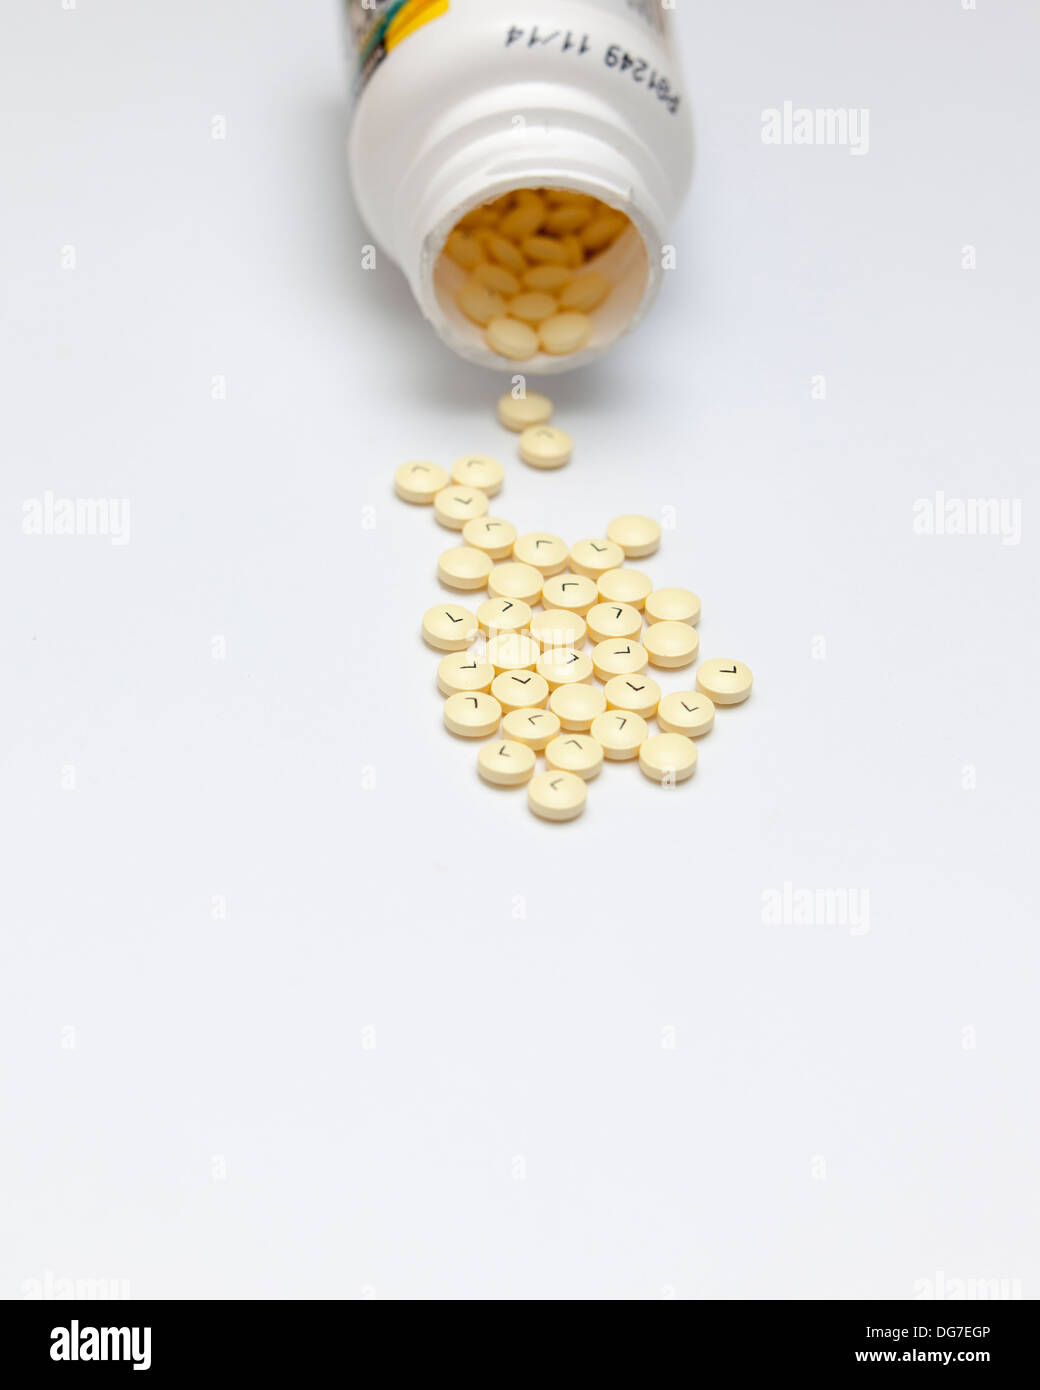 81 mg aspirin for daily use as part of a heart healthy lifestyle Stock Photo